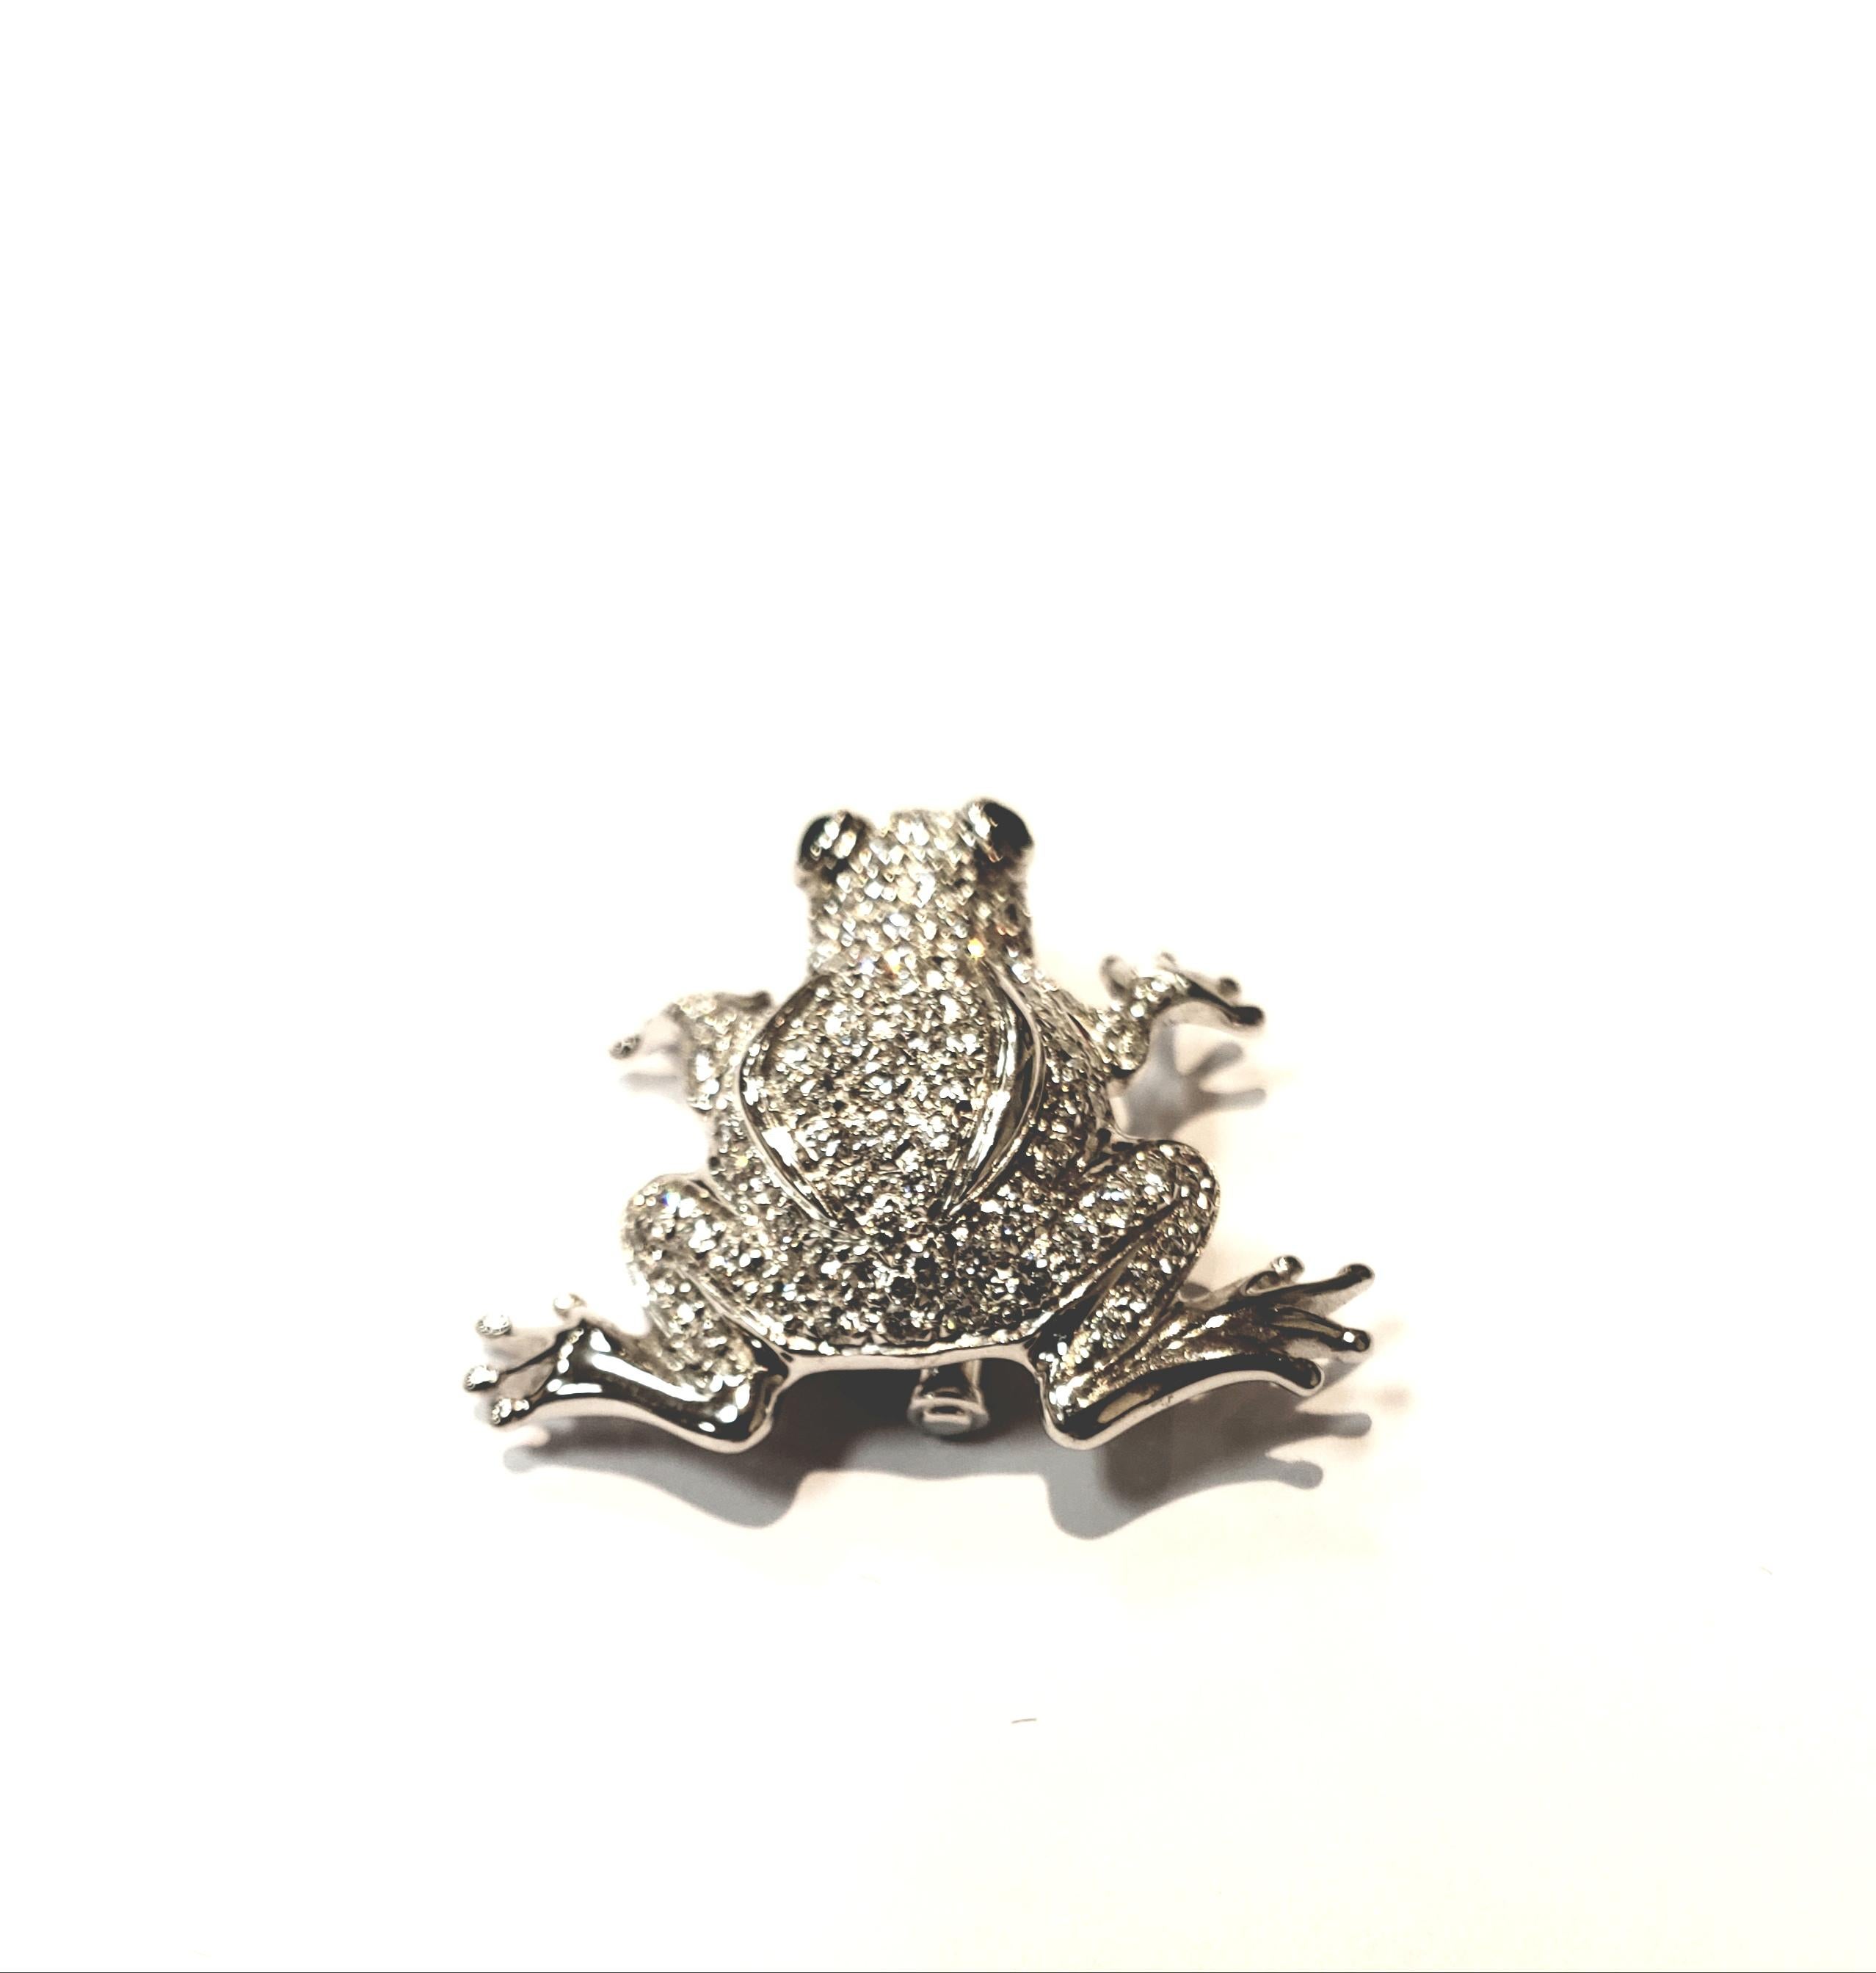 18 Karat White Gold and Diamond Frog Pin with Emerald Eyes by Aldo Garavelli In Excellent Condition For Sale In Red Bank, NJ